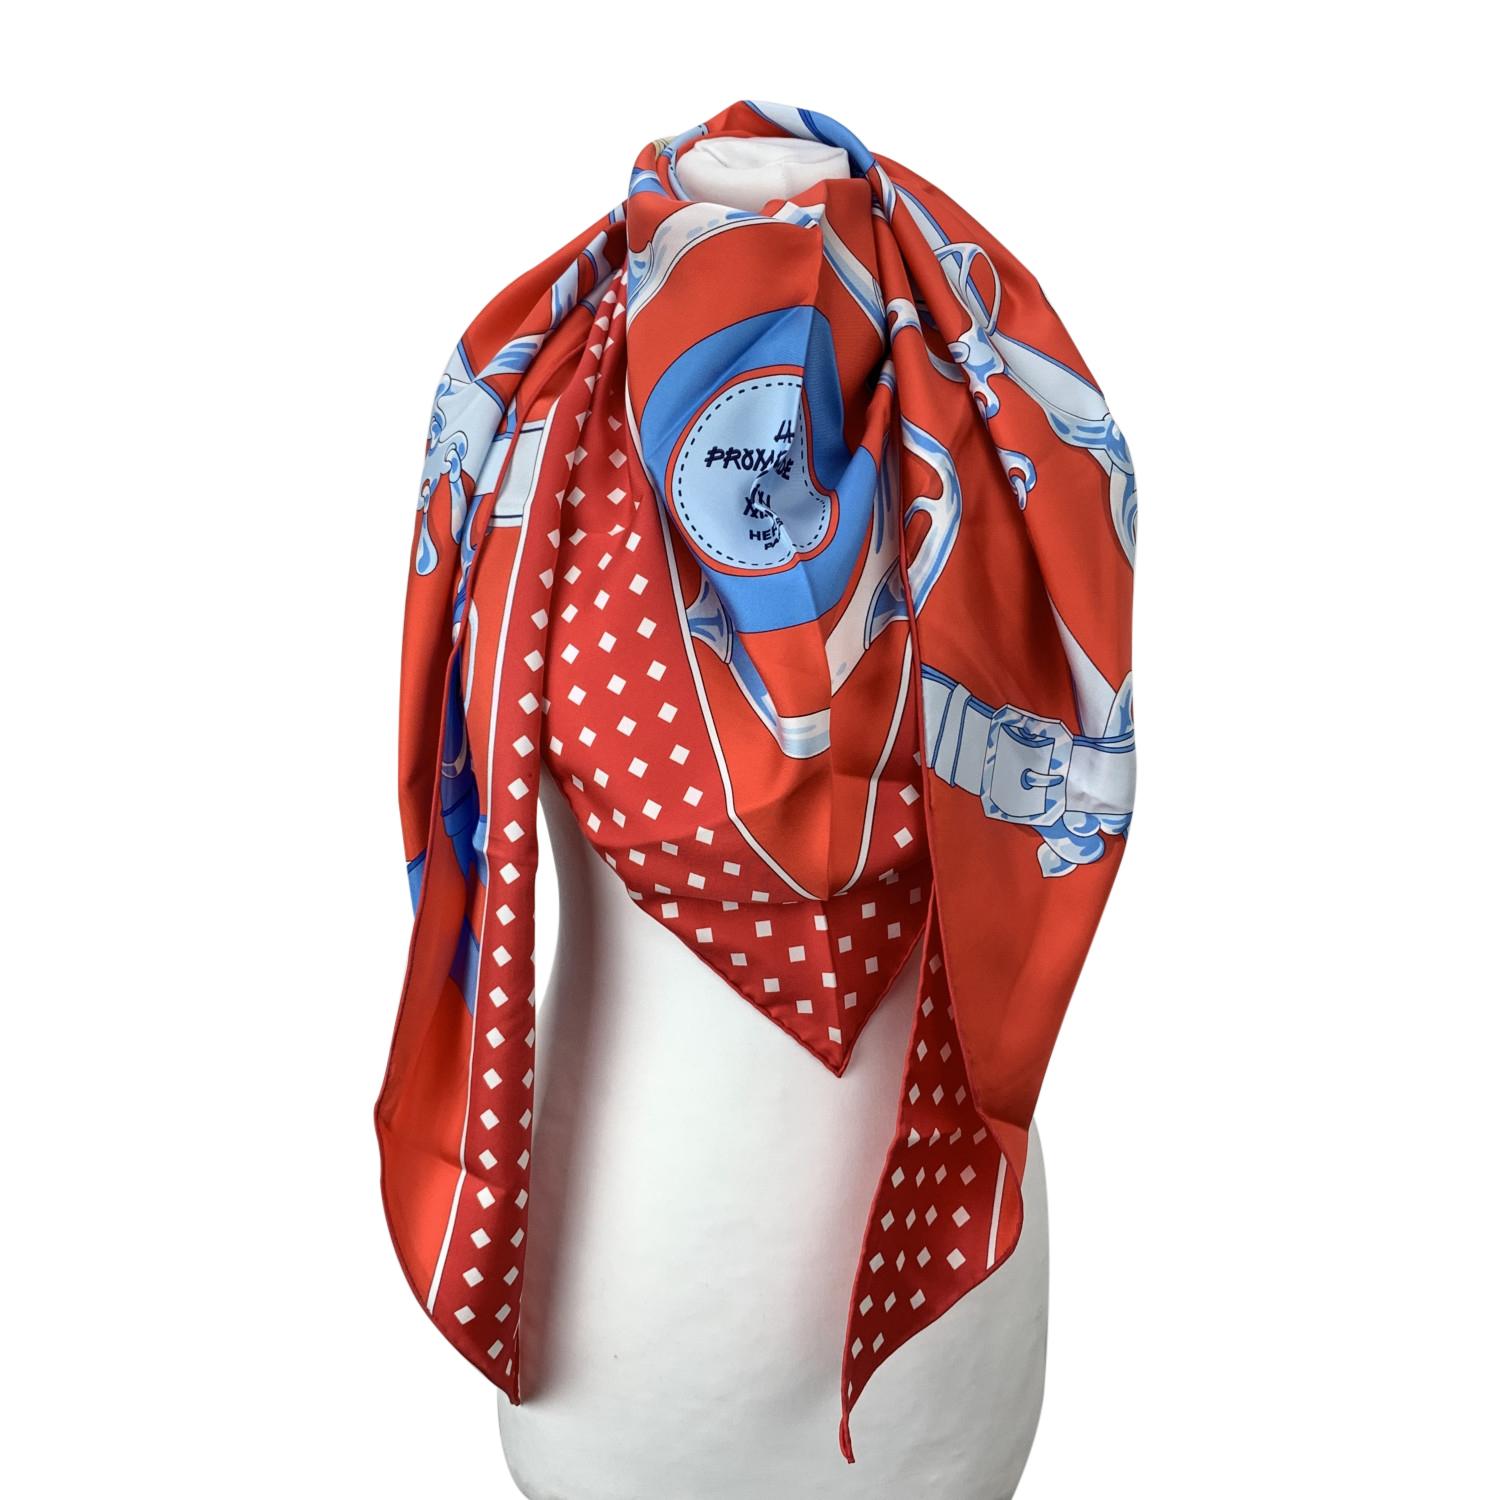 HERMES Silk Giant Triangle scarf named 'La Promenade du Matin', designed by famed artist Henri d'Origny. The Giant Triangle was launched in early March 2019. Hermes with copyright symbol printed on the scarf. Hermes composition tag is still